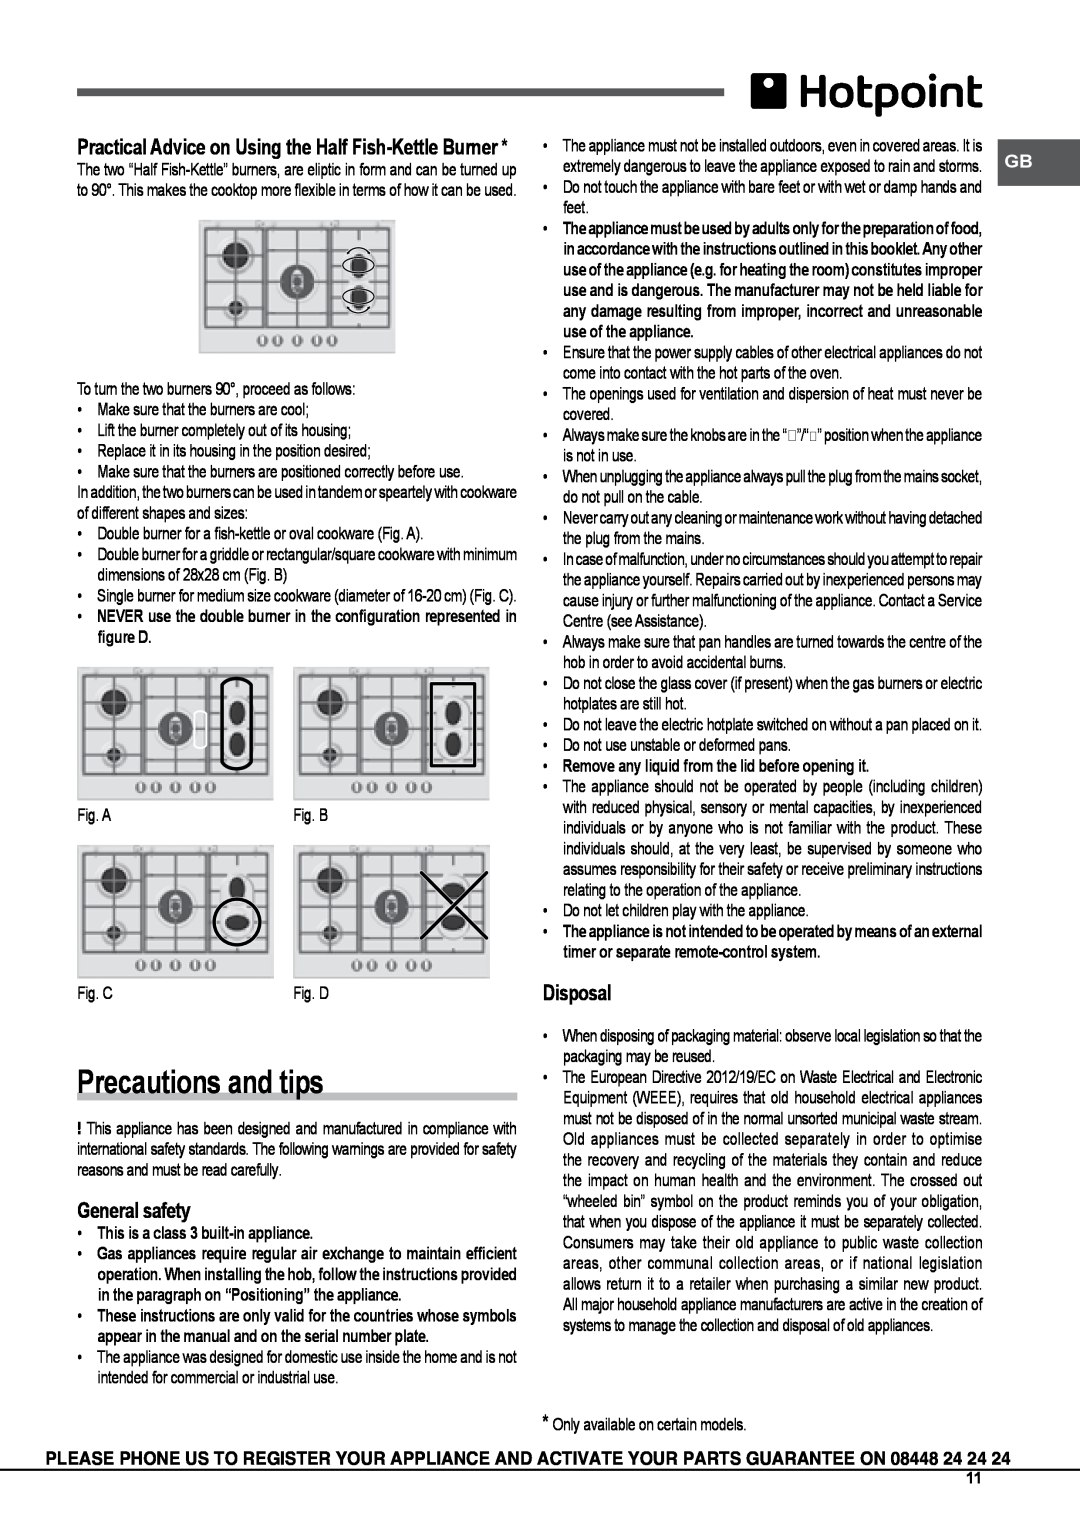 Hotpoint GX751RTX Precautions and tips, General safety, Disposal, Practical Advice on Using the Half Fish-Kettle Burner 